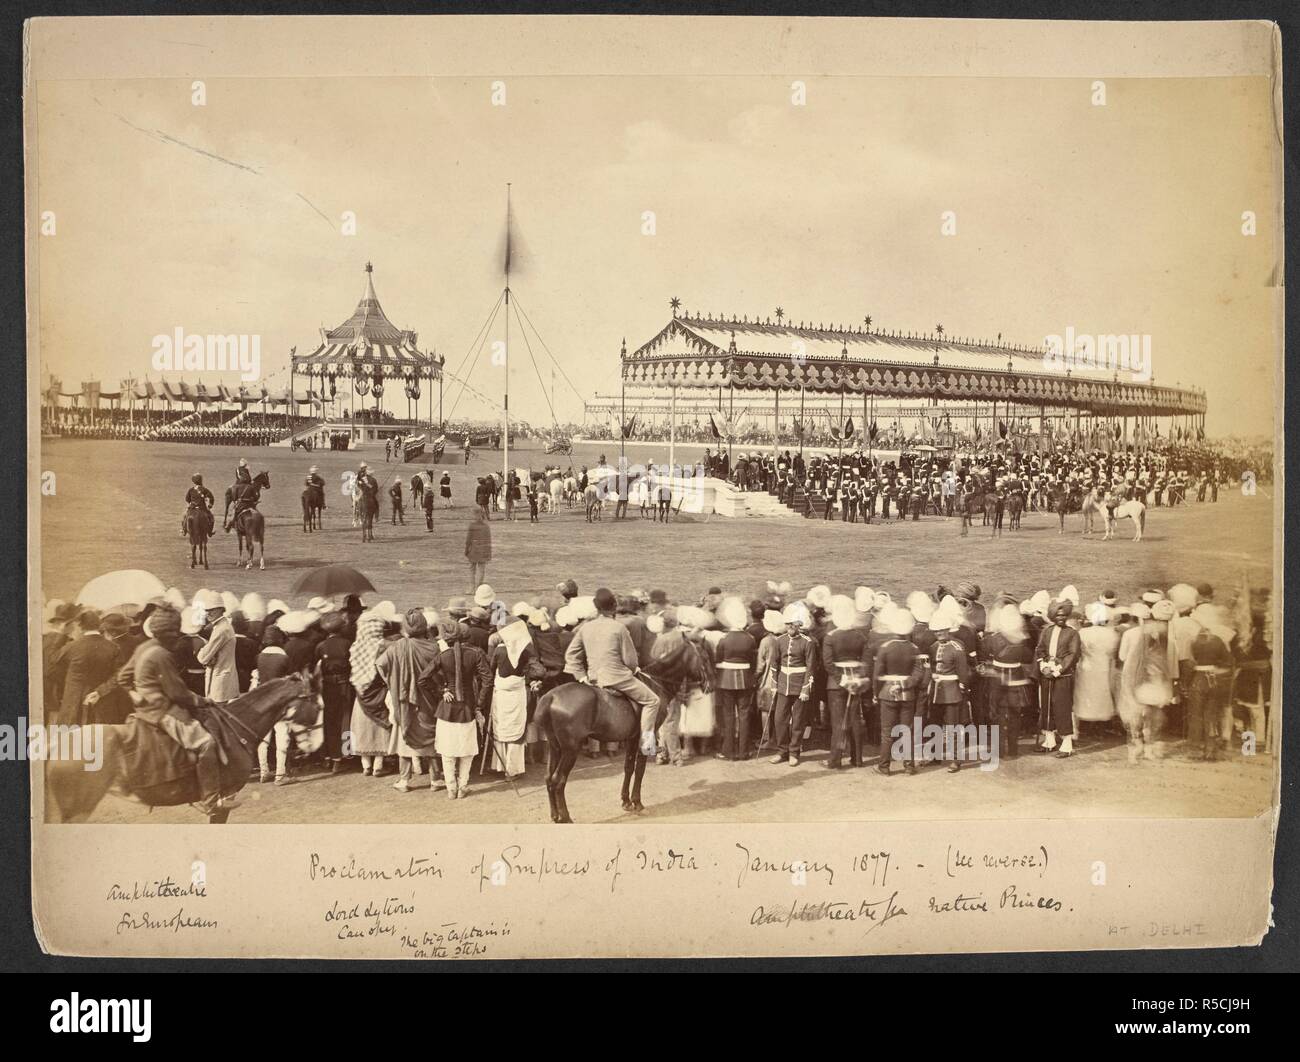 Proclamation of Empress of India, January 1877. General view of the assemblage with crowds of spectators in the foreground. Contemporary notes on the mount beneath the print identify the amphitheatre for Europeans (left), Lord Lytton's canopy (centre: the Viceroy can just be made out seated beneath the canopy), and the amphitheatre for native princes (right). 1 Jan 1877. photograph. Source: Photo 4/(1). Language: English. Author: BOURNE AND SHEPHERD. Stock Photo